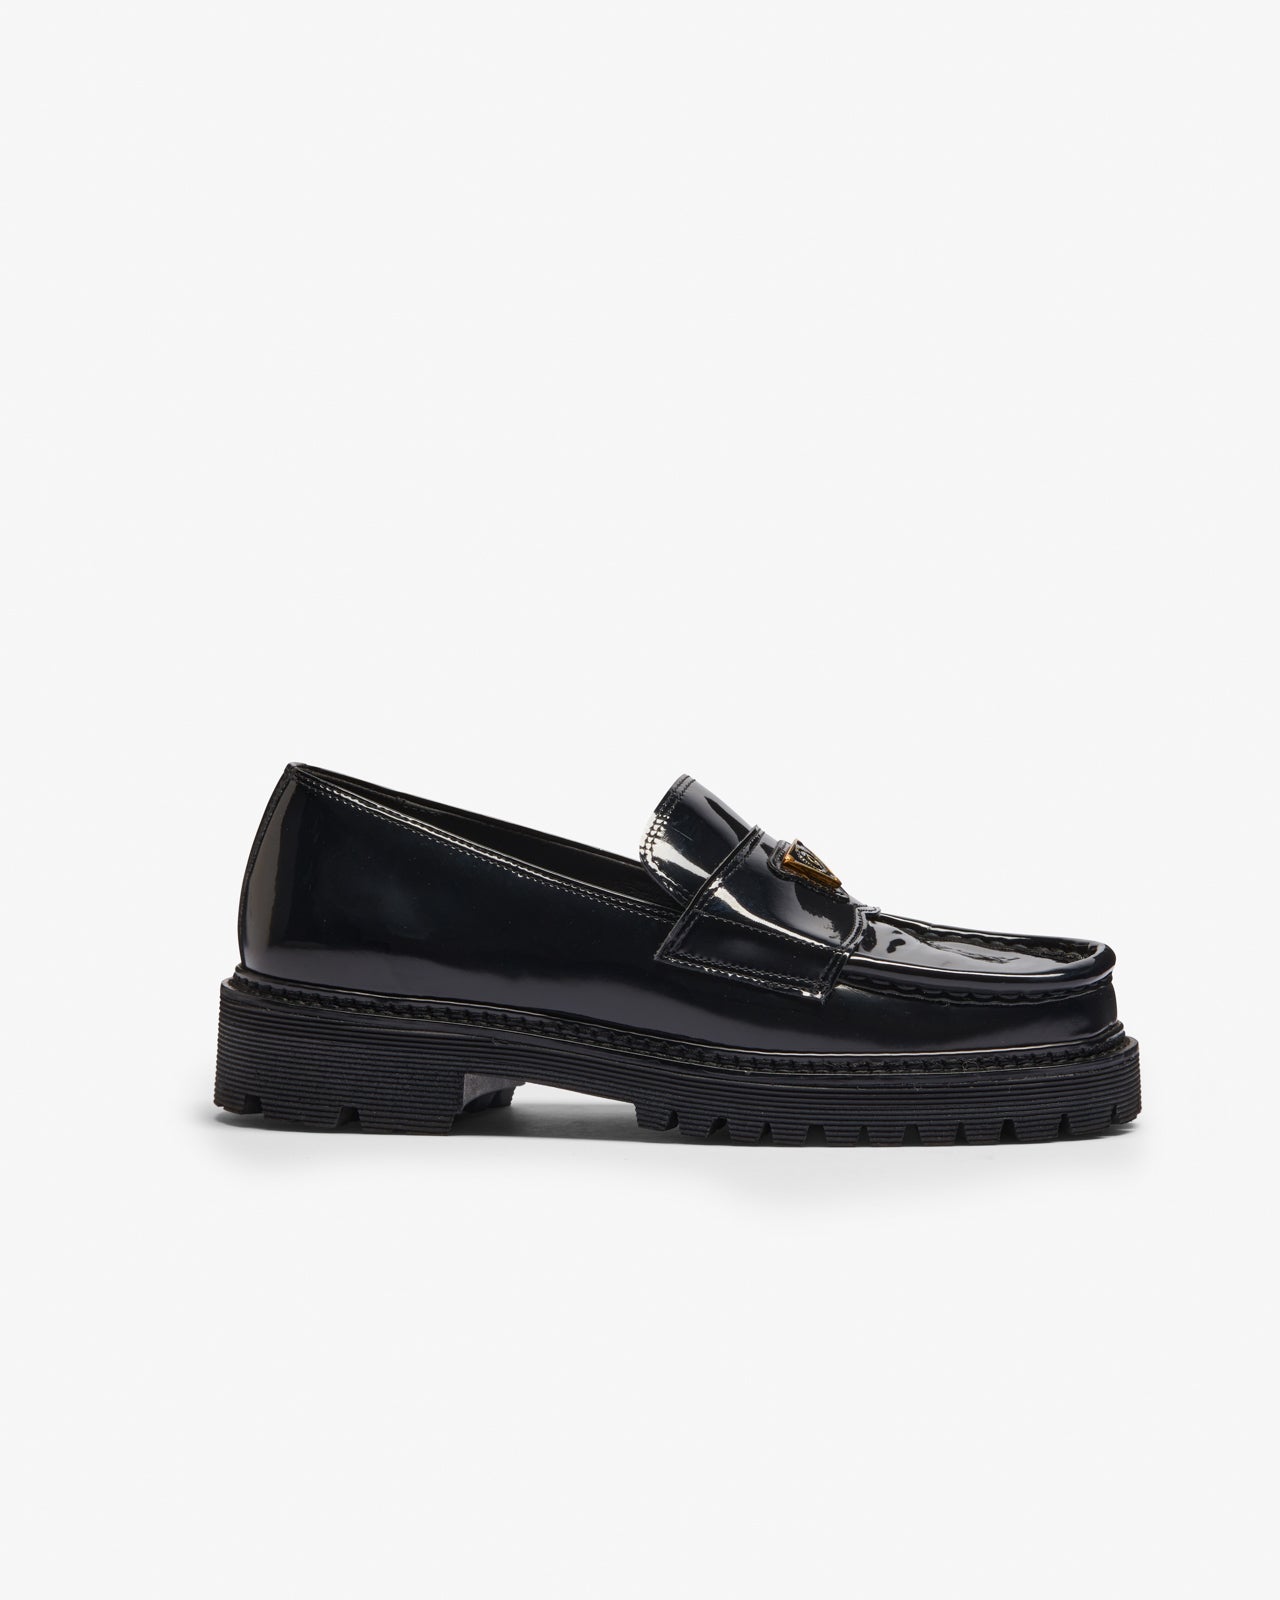 The Noskin Lulie Patent Loafer